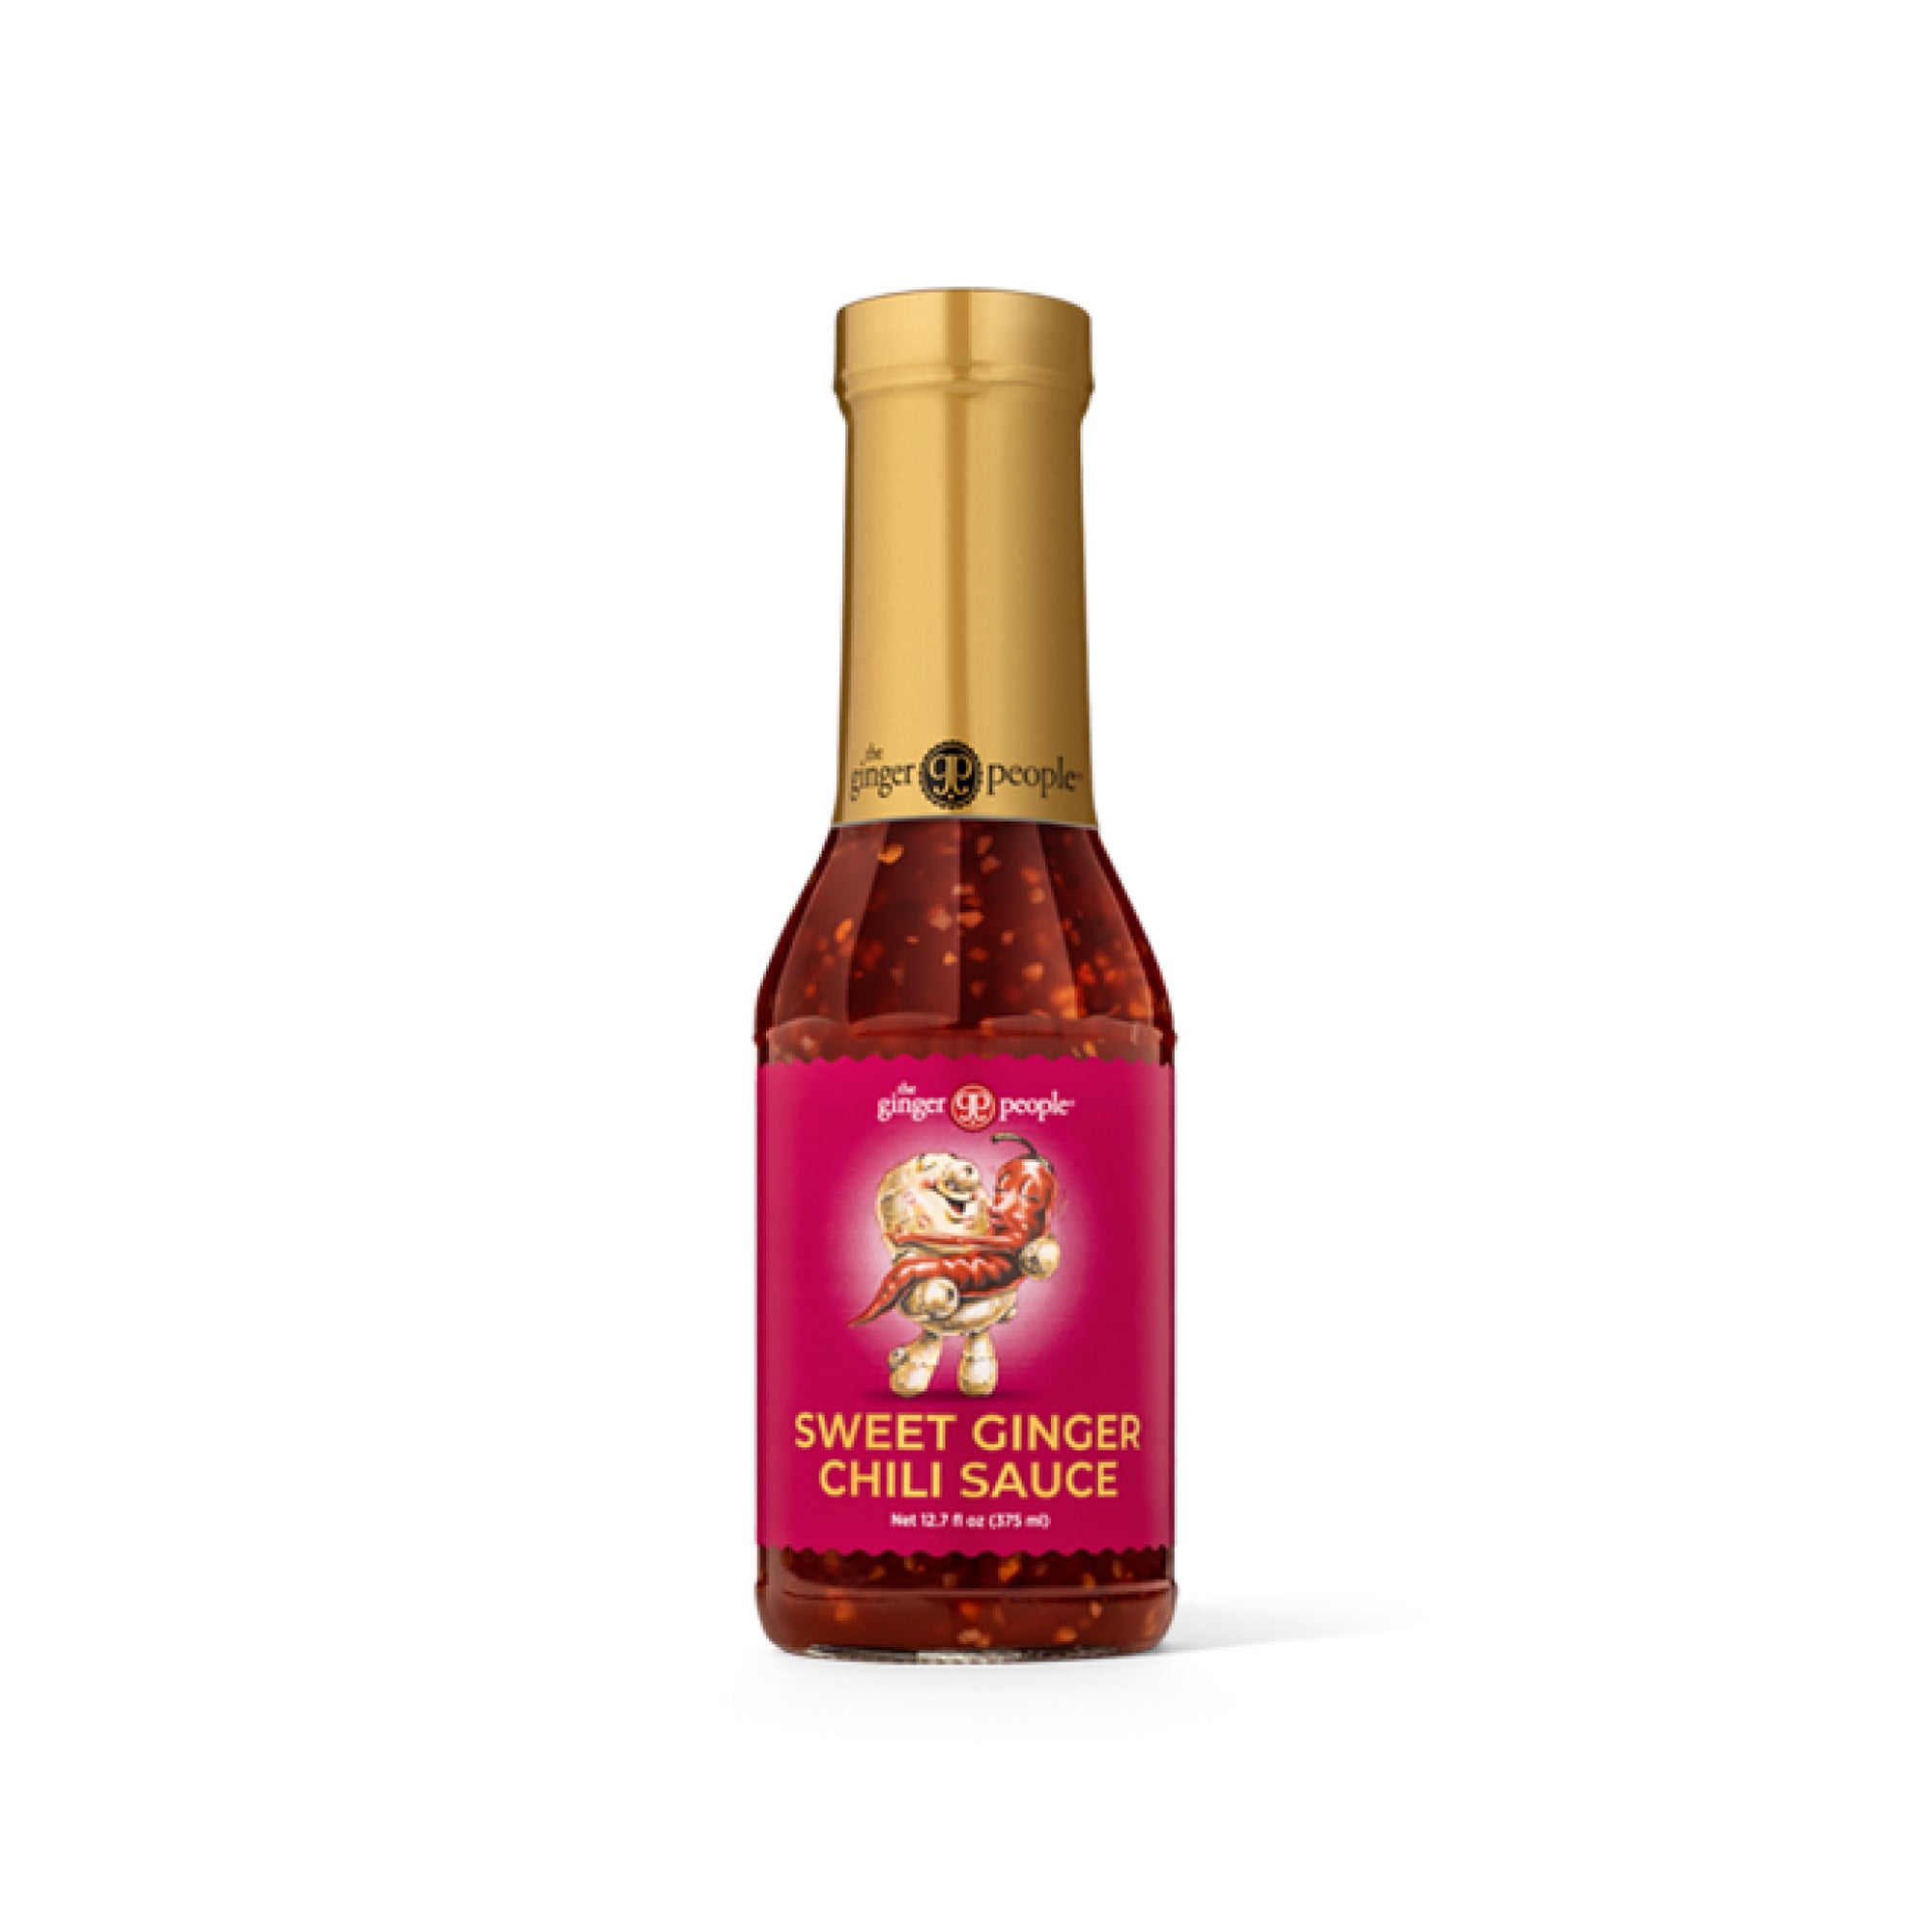 The Ginger People Sweet Ginger Chili Sauce 375ml